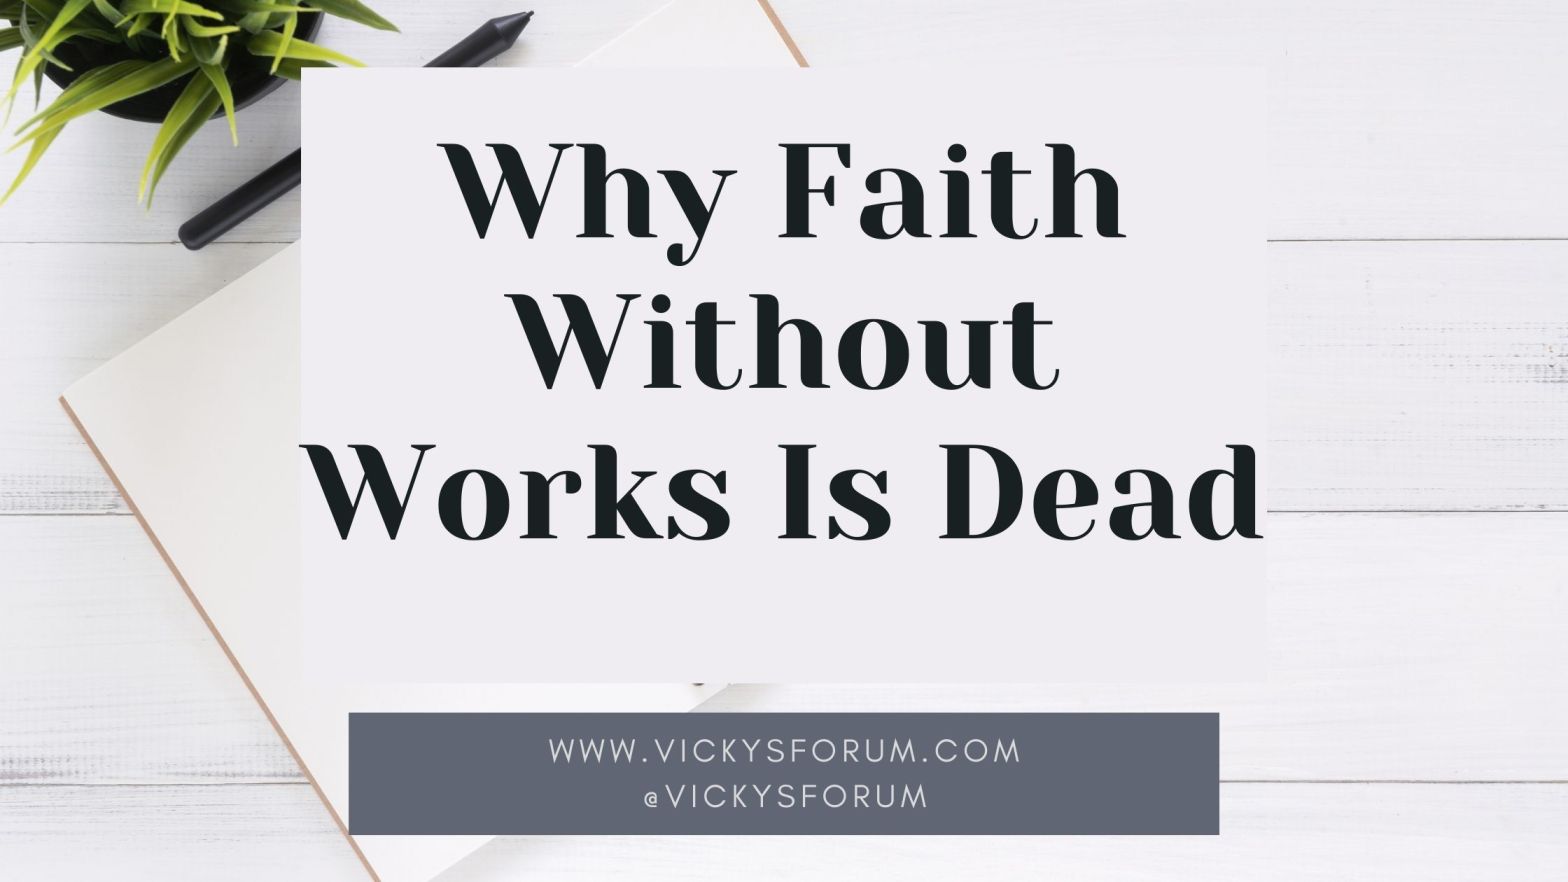 Faith without works is dead